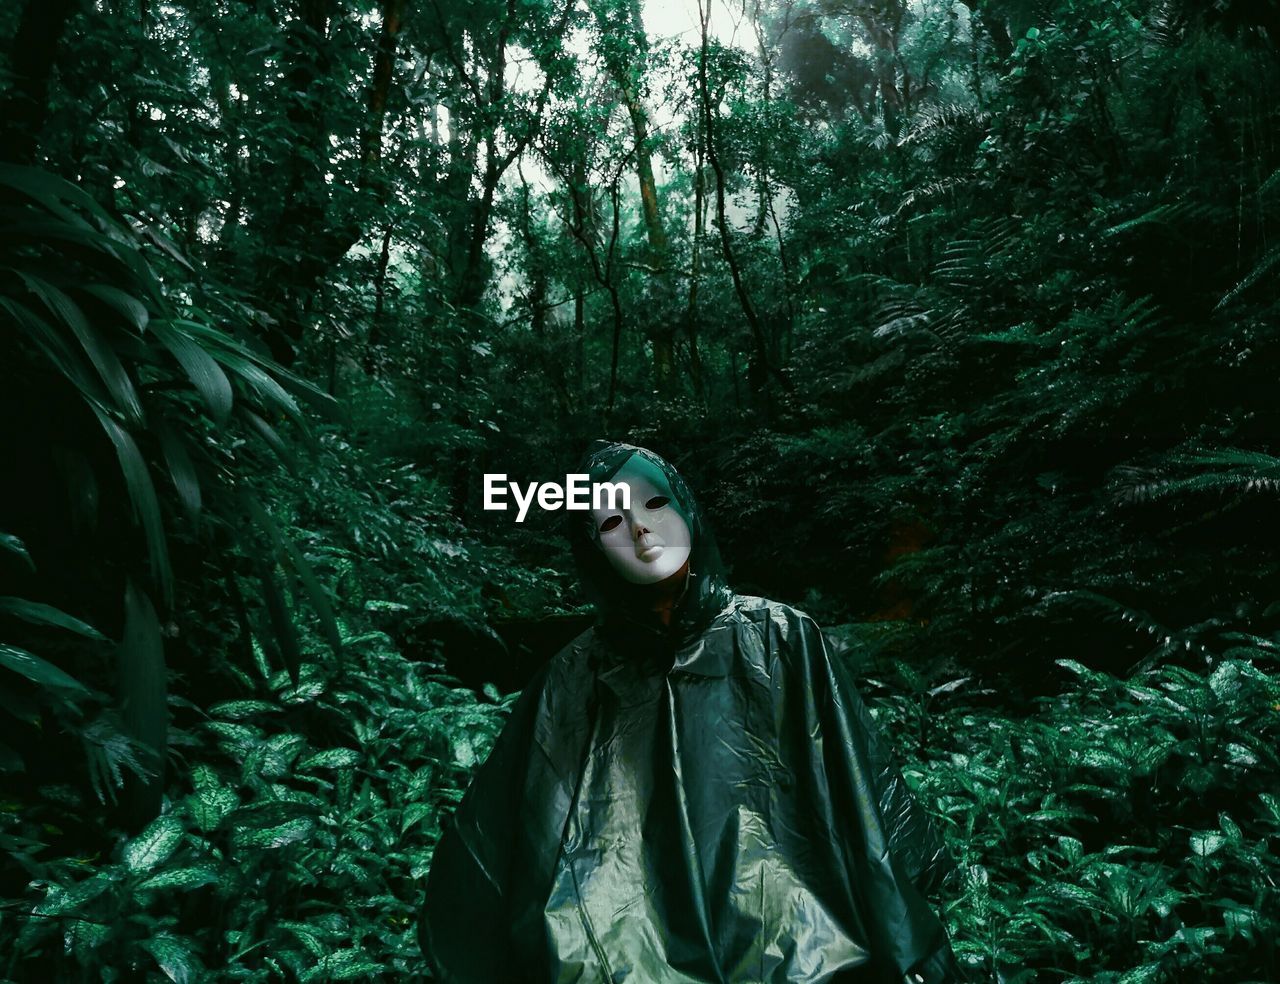 Portrait of person wearing mask amidst trees in forest